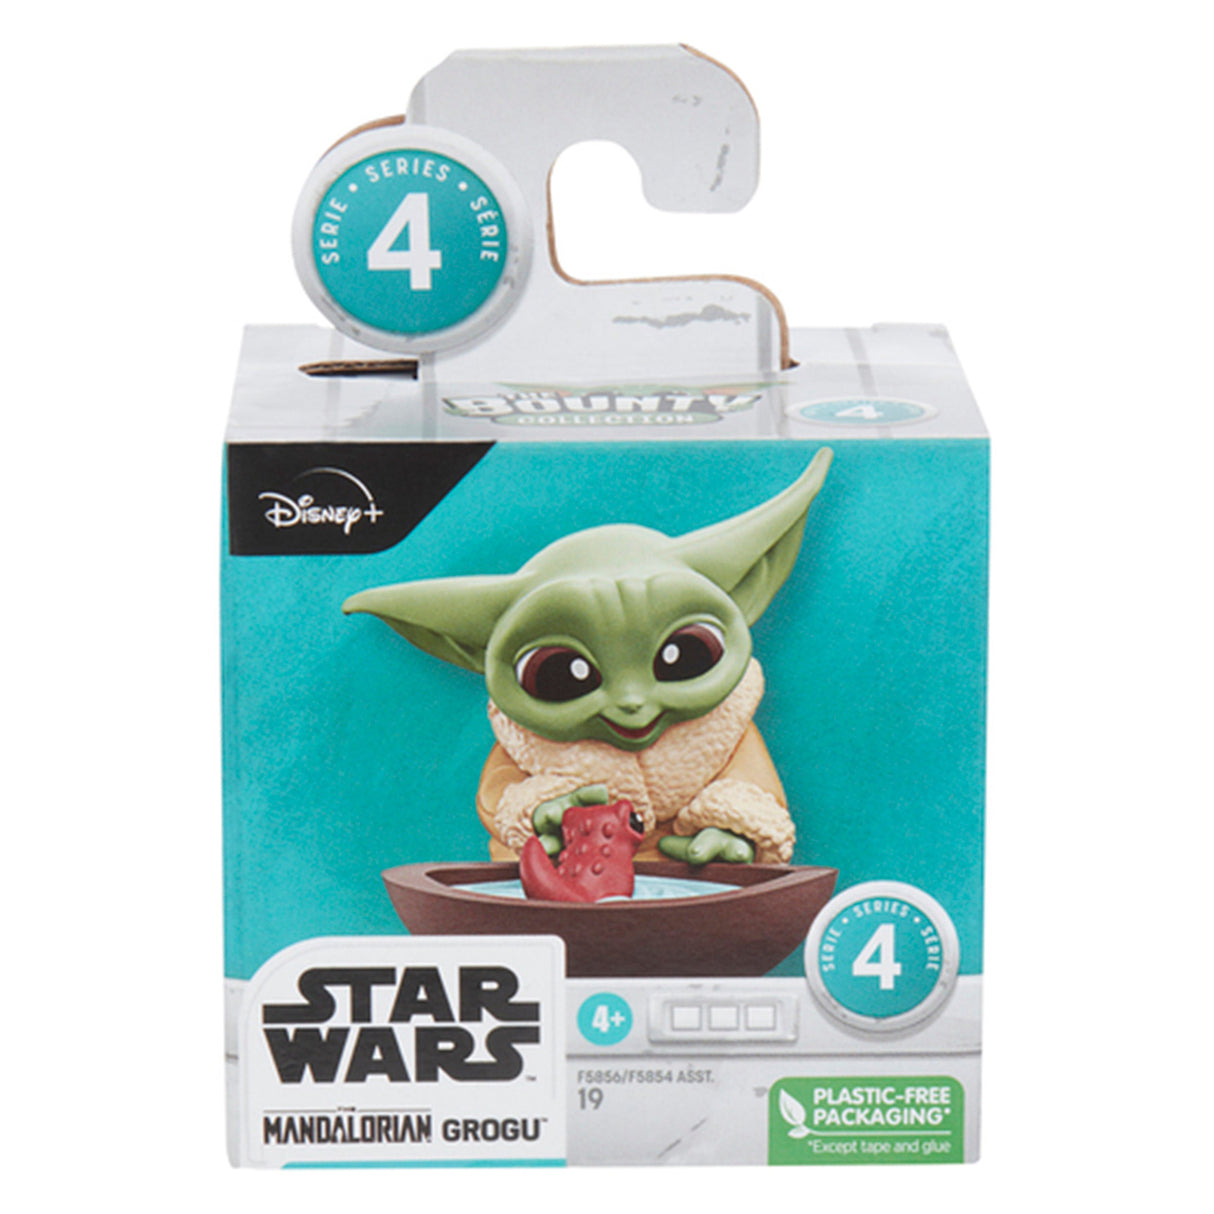 Star Wars The Bounty Collection Series 4 Grogu (The Child) Figure - Tadpole Friend